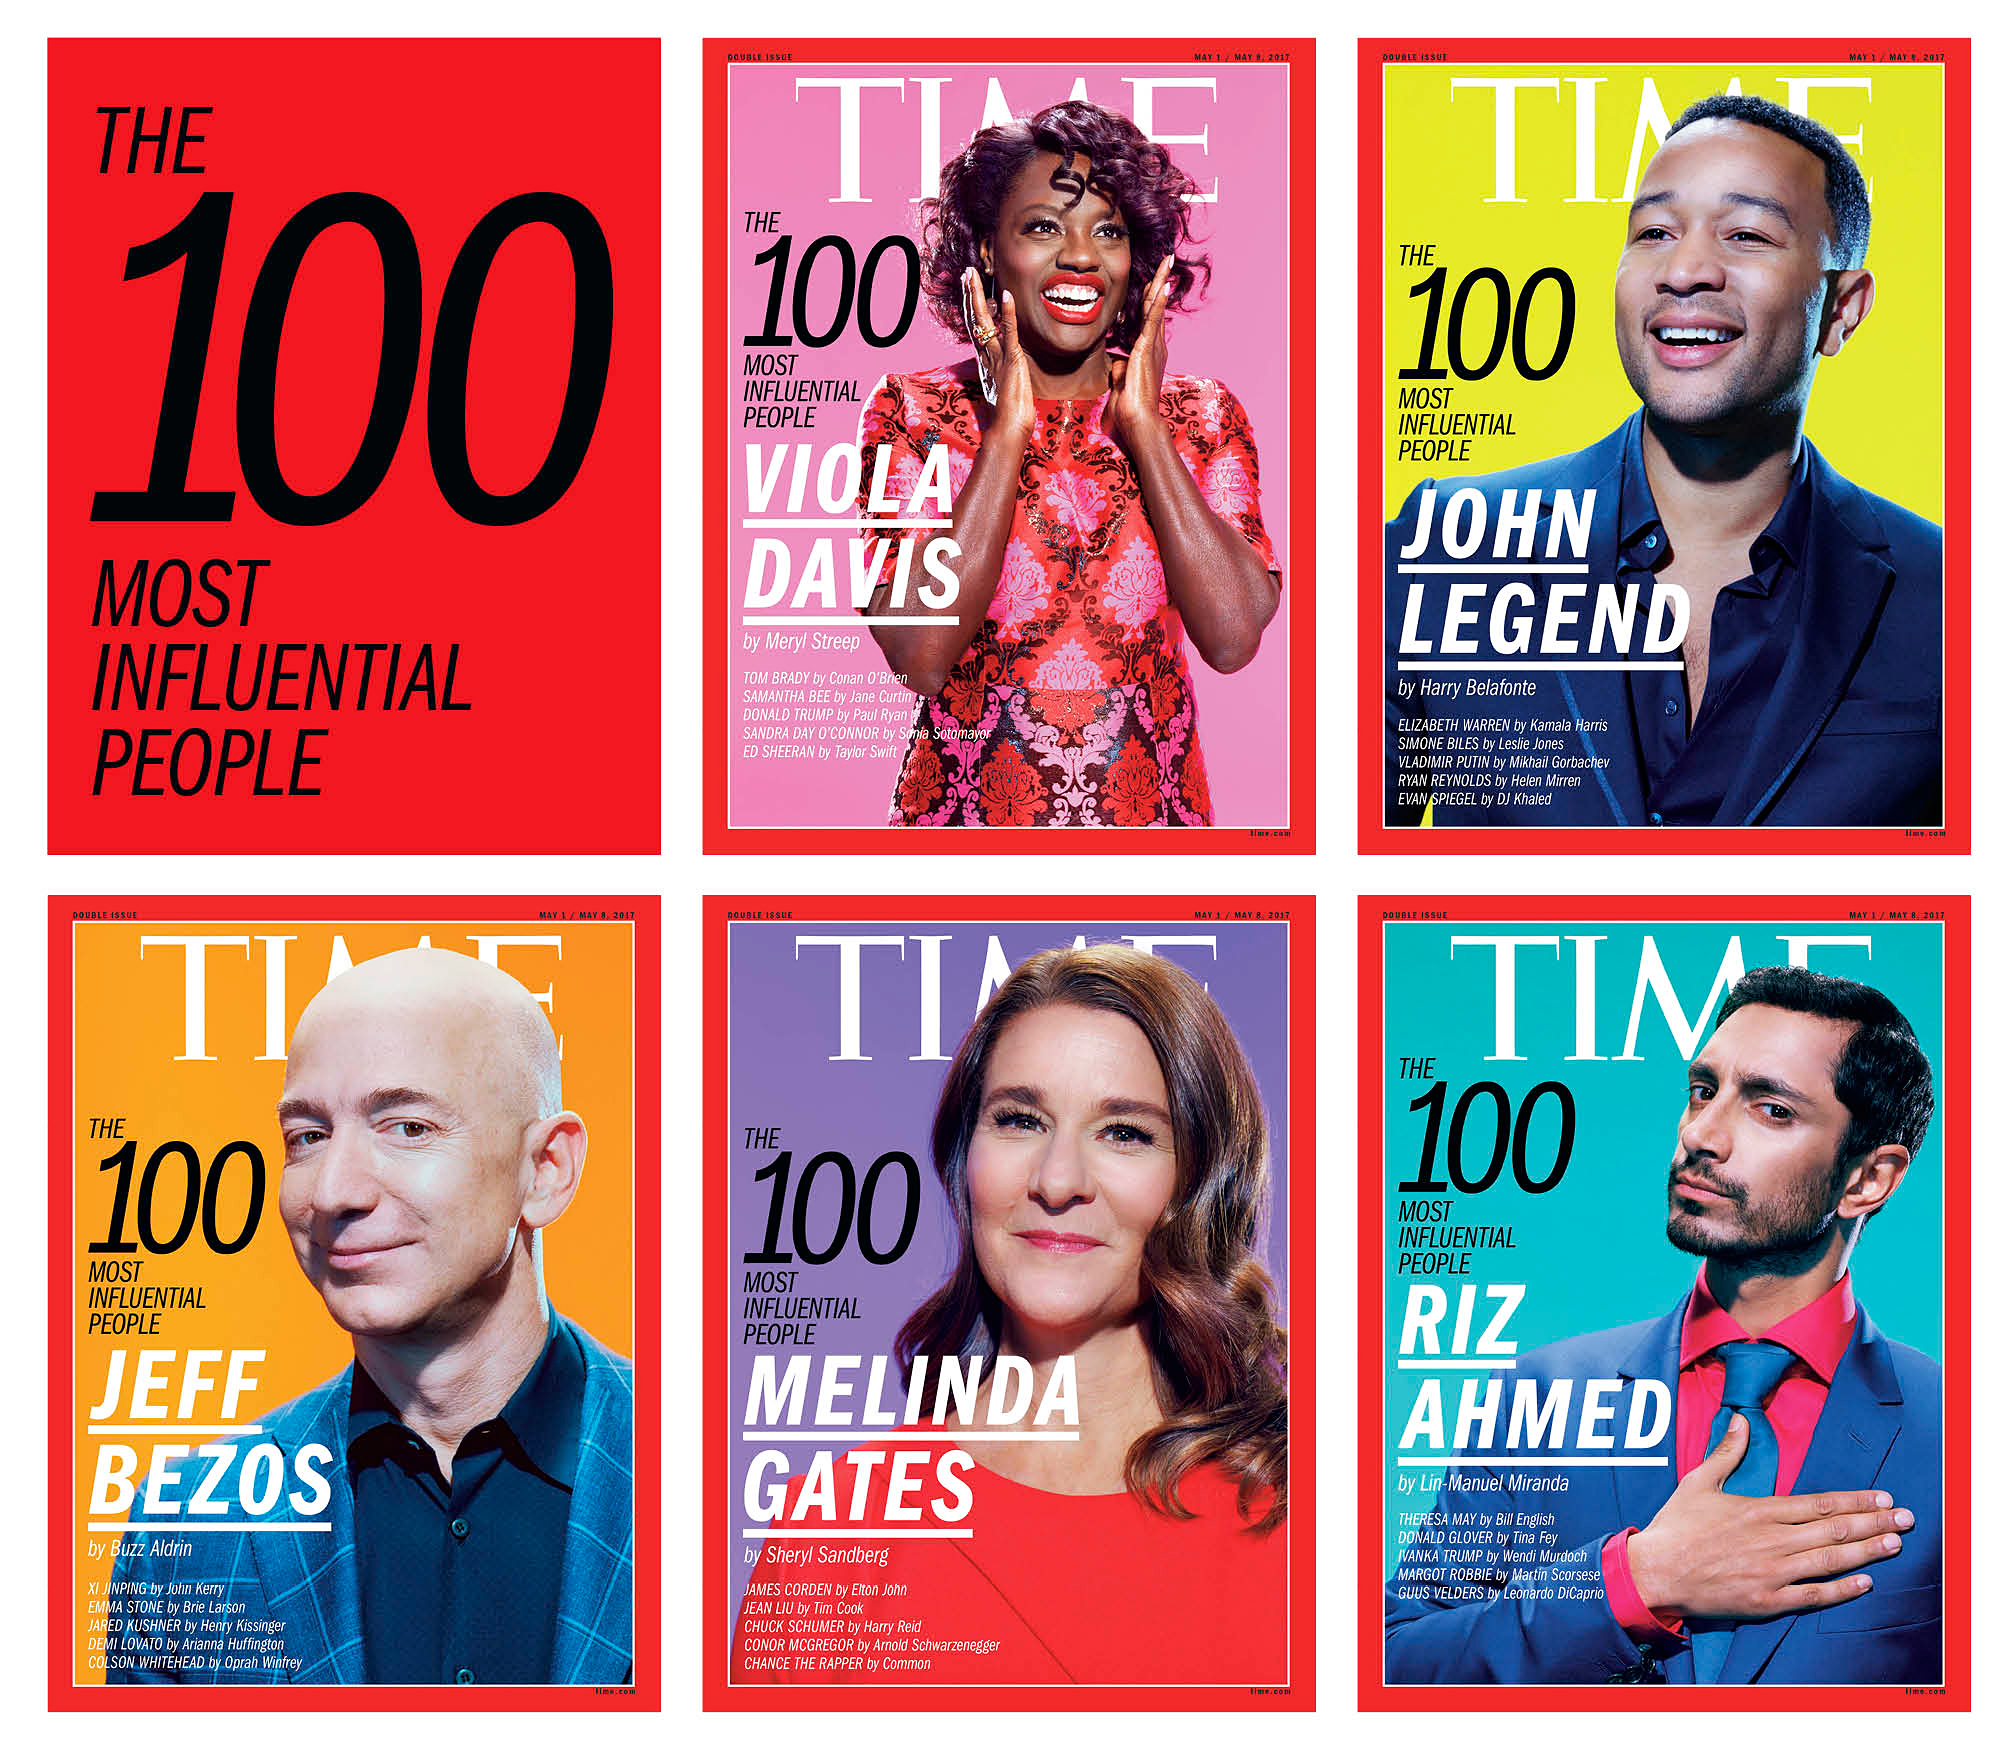 Time Reveals 100 Most Influential People In The World List For 2017